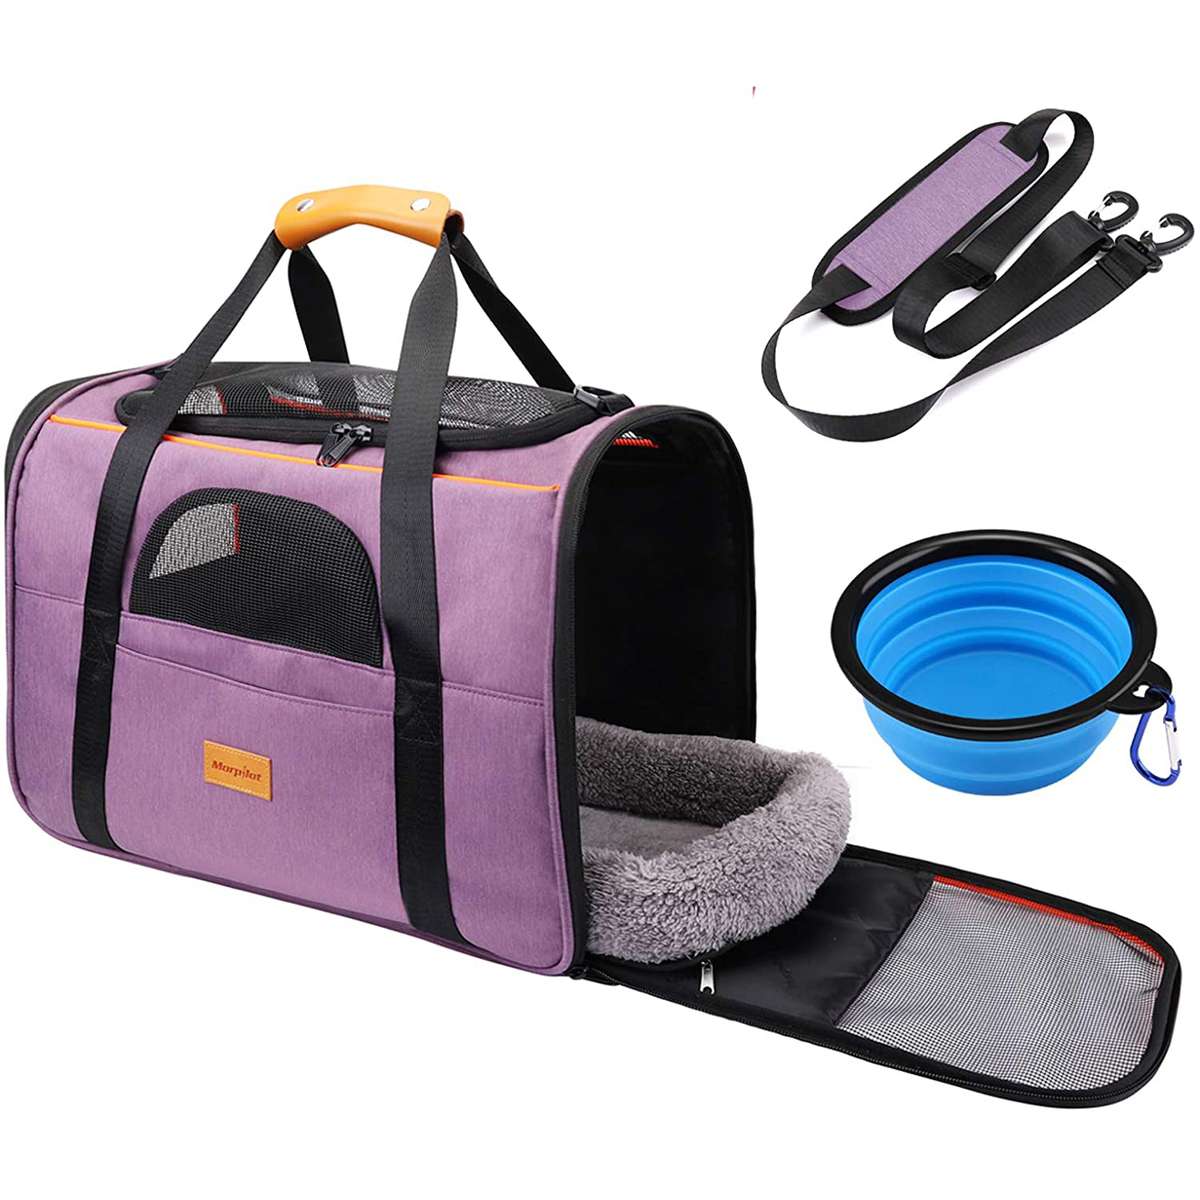 pet carriers